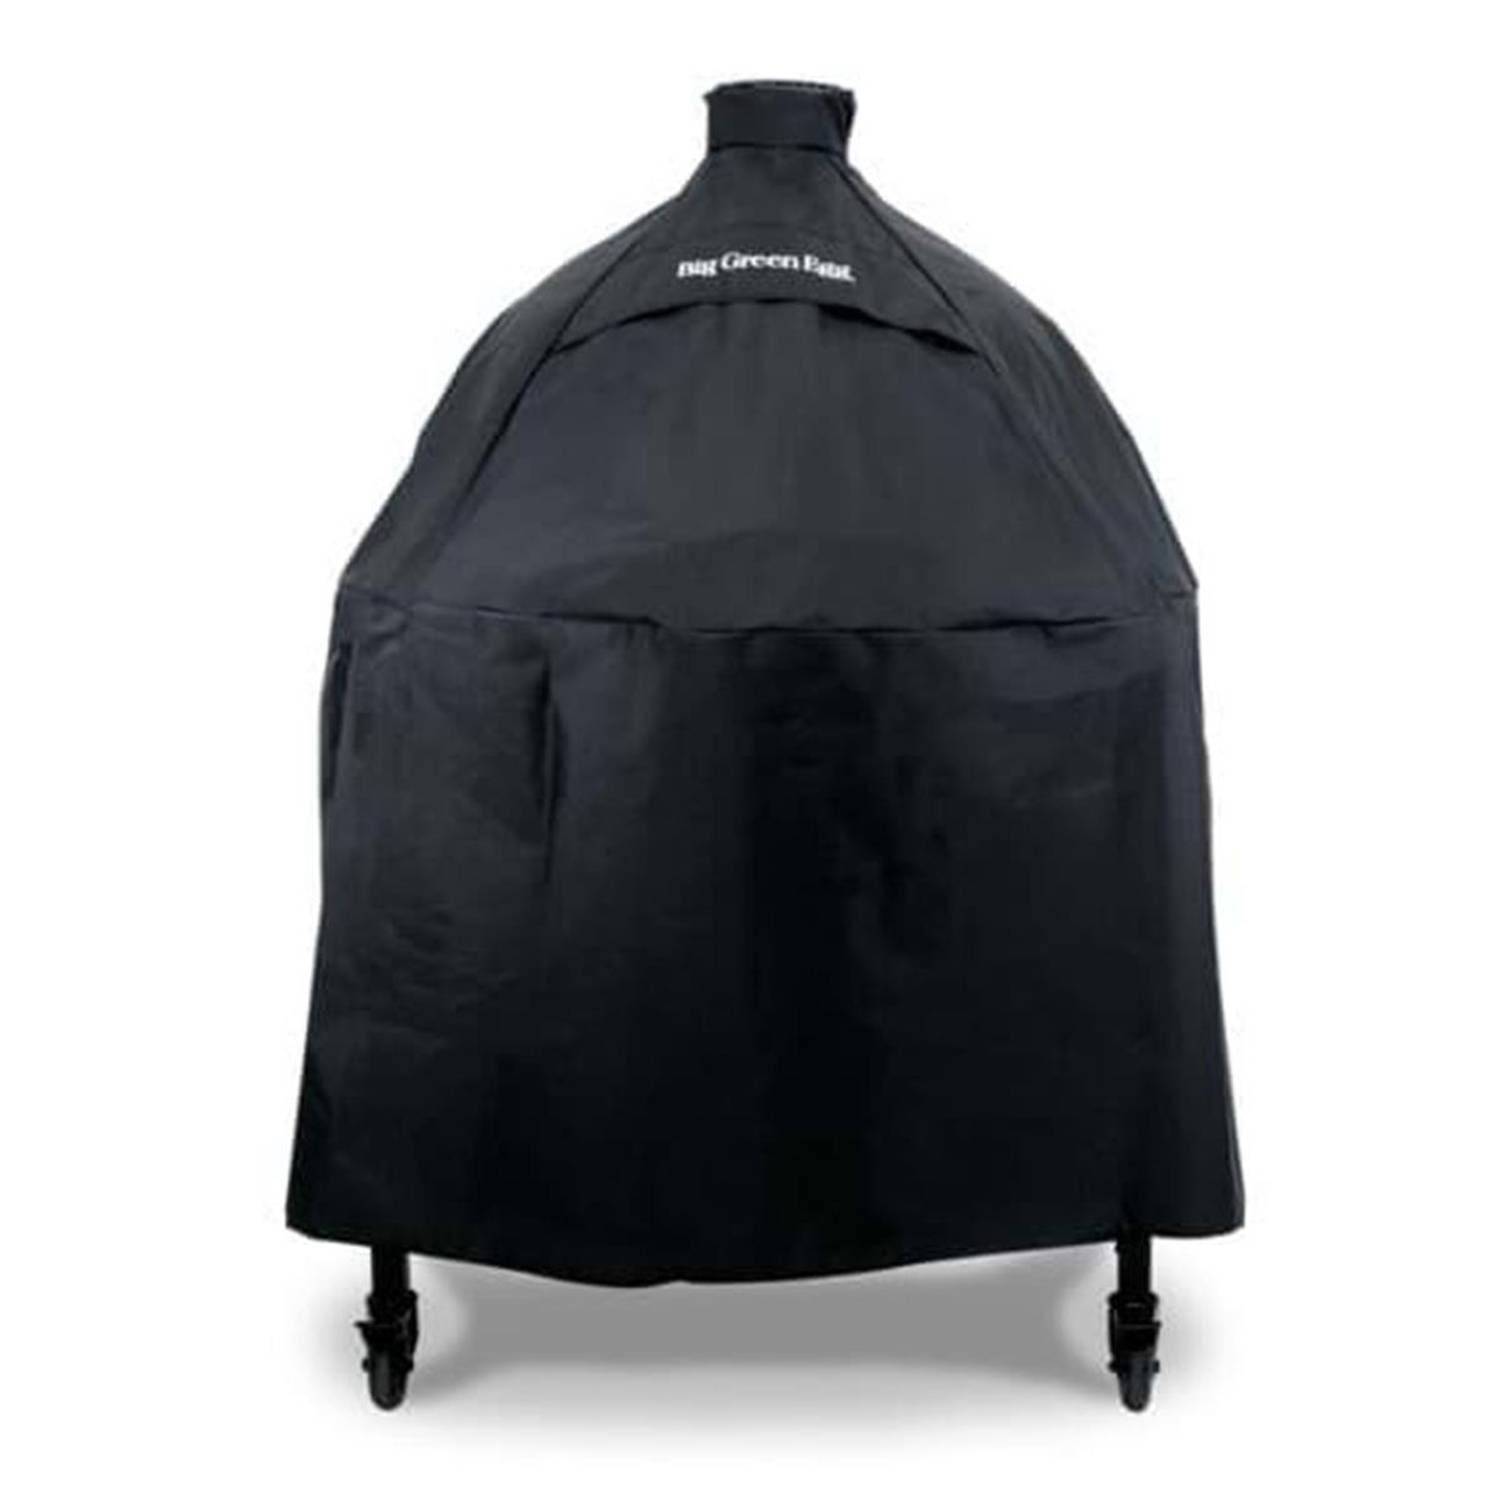 Big Green Egg - Cover for 2XL, XL, L Egg in Modular Nest